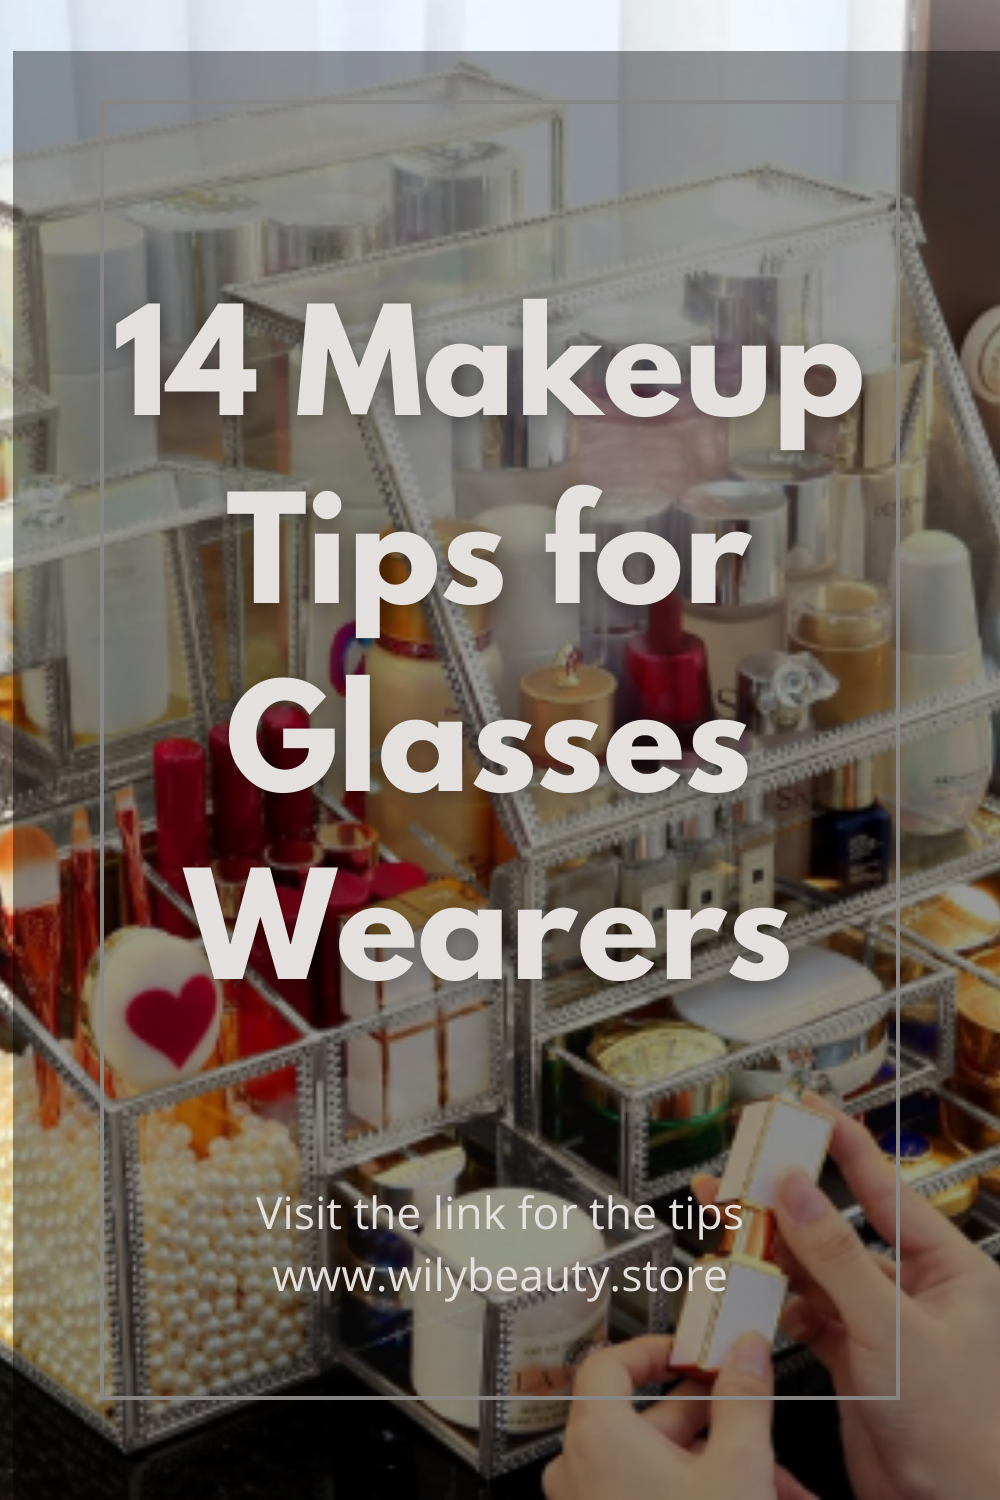 14 Makeup Tips for Glasses Wearers